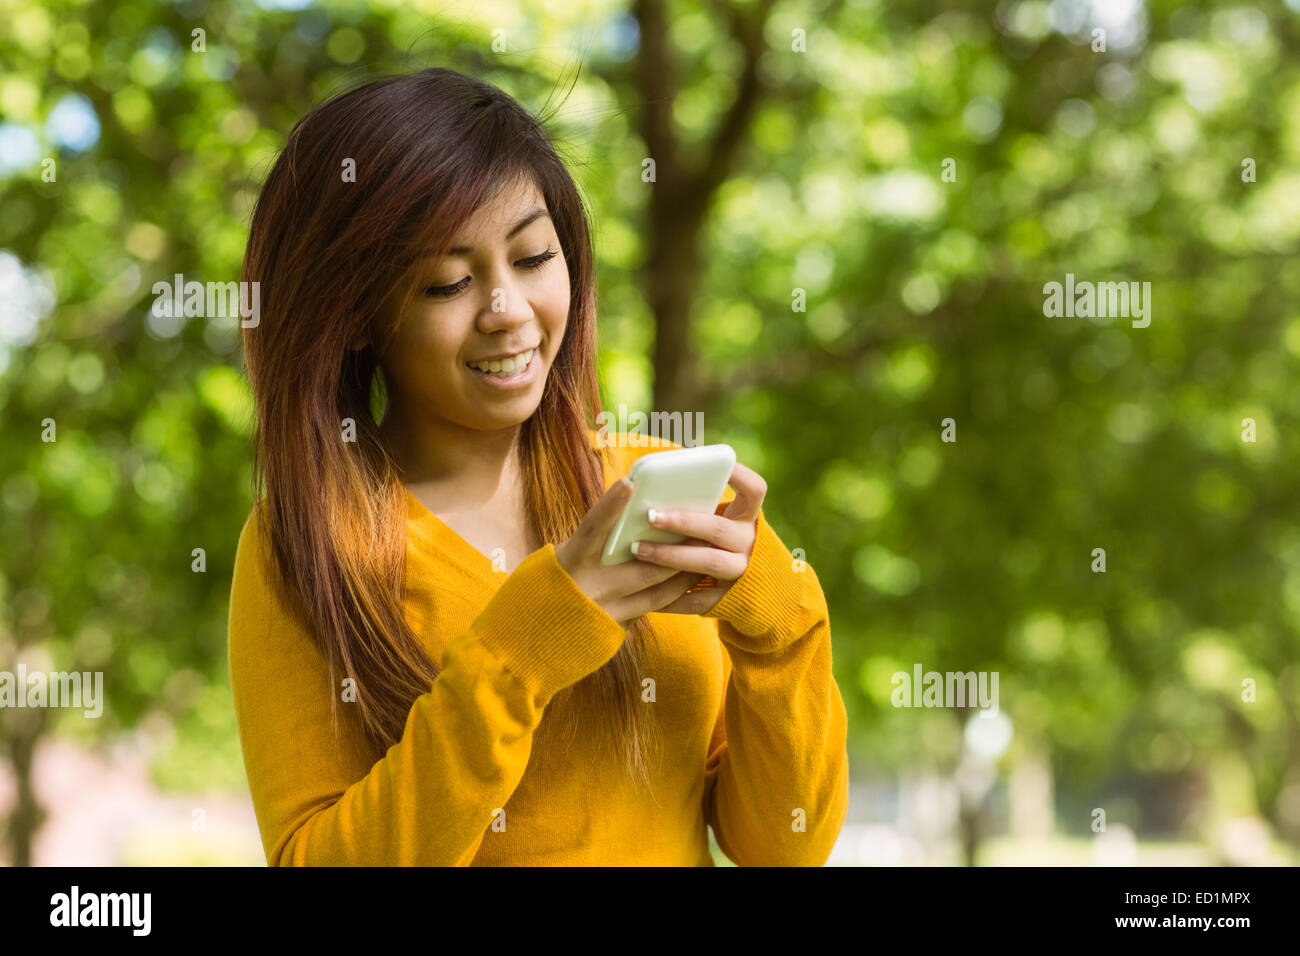 Woman text messaging in park Stock Photo